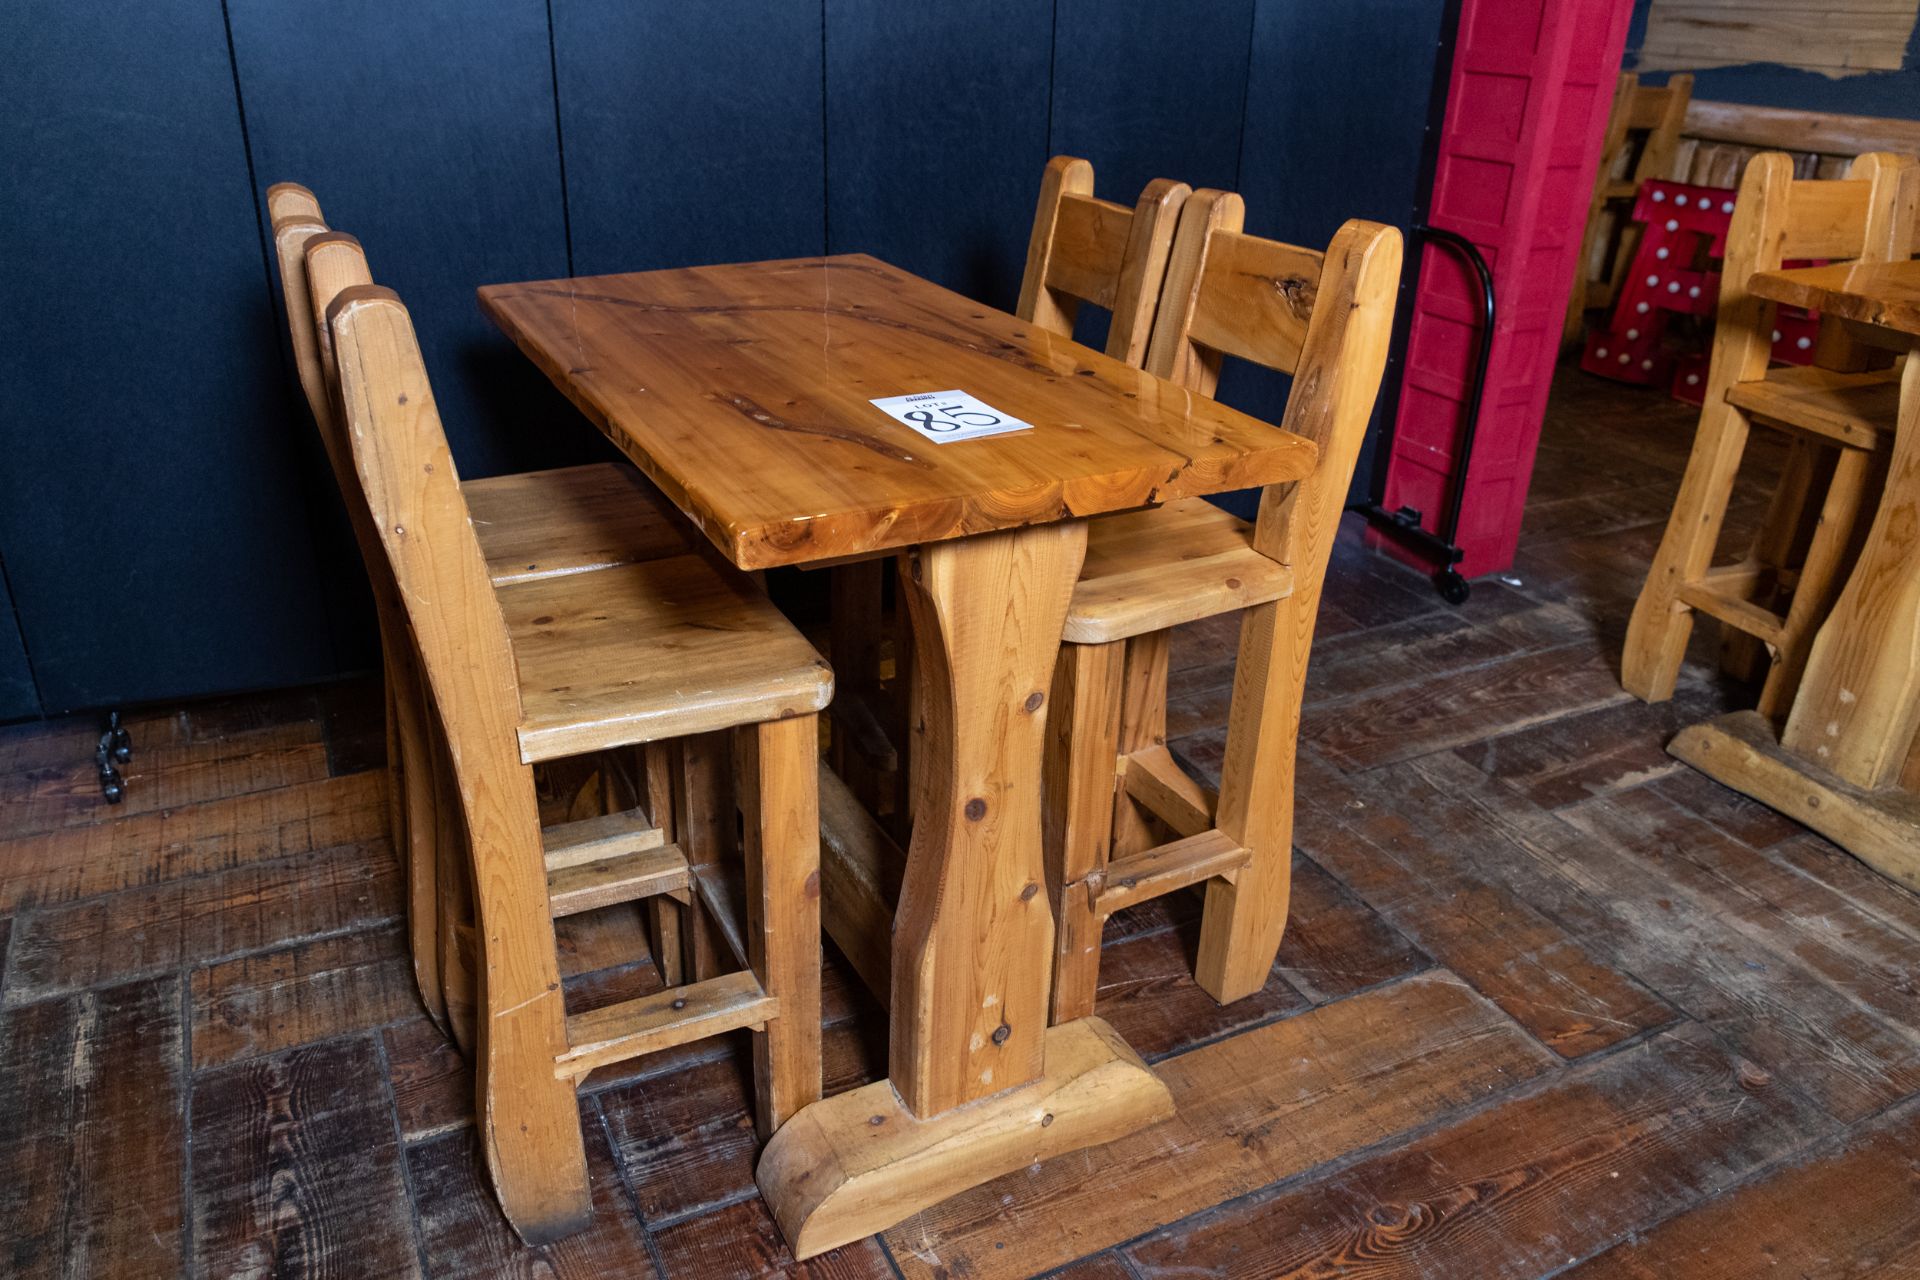 PUB TABLE WITH FOUR CHAIRS - TABLE L 48" W 29 1/2" H 41" - Image 3 of 4